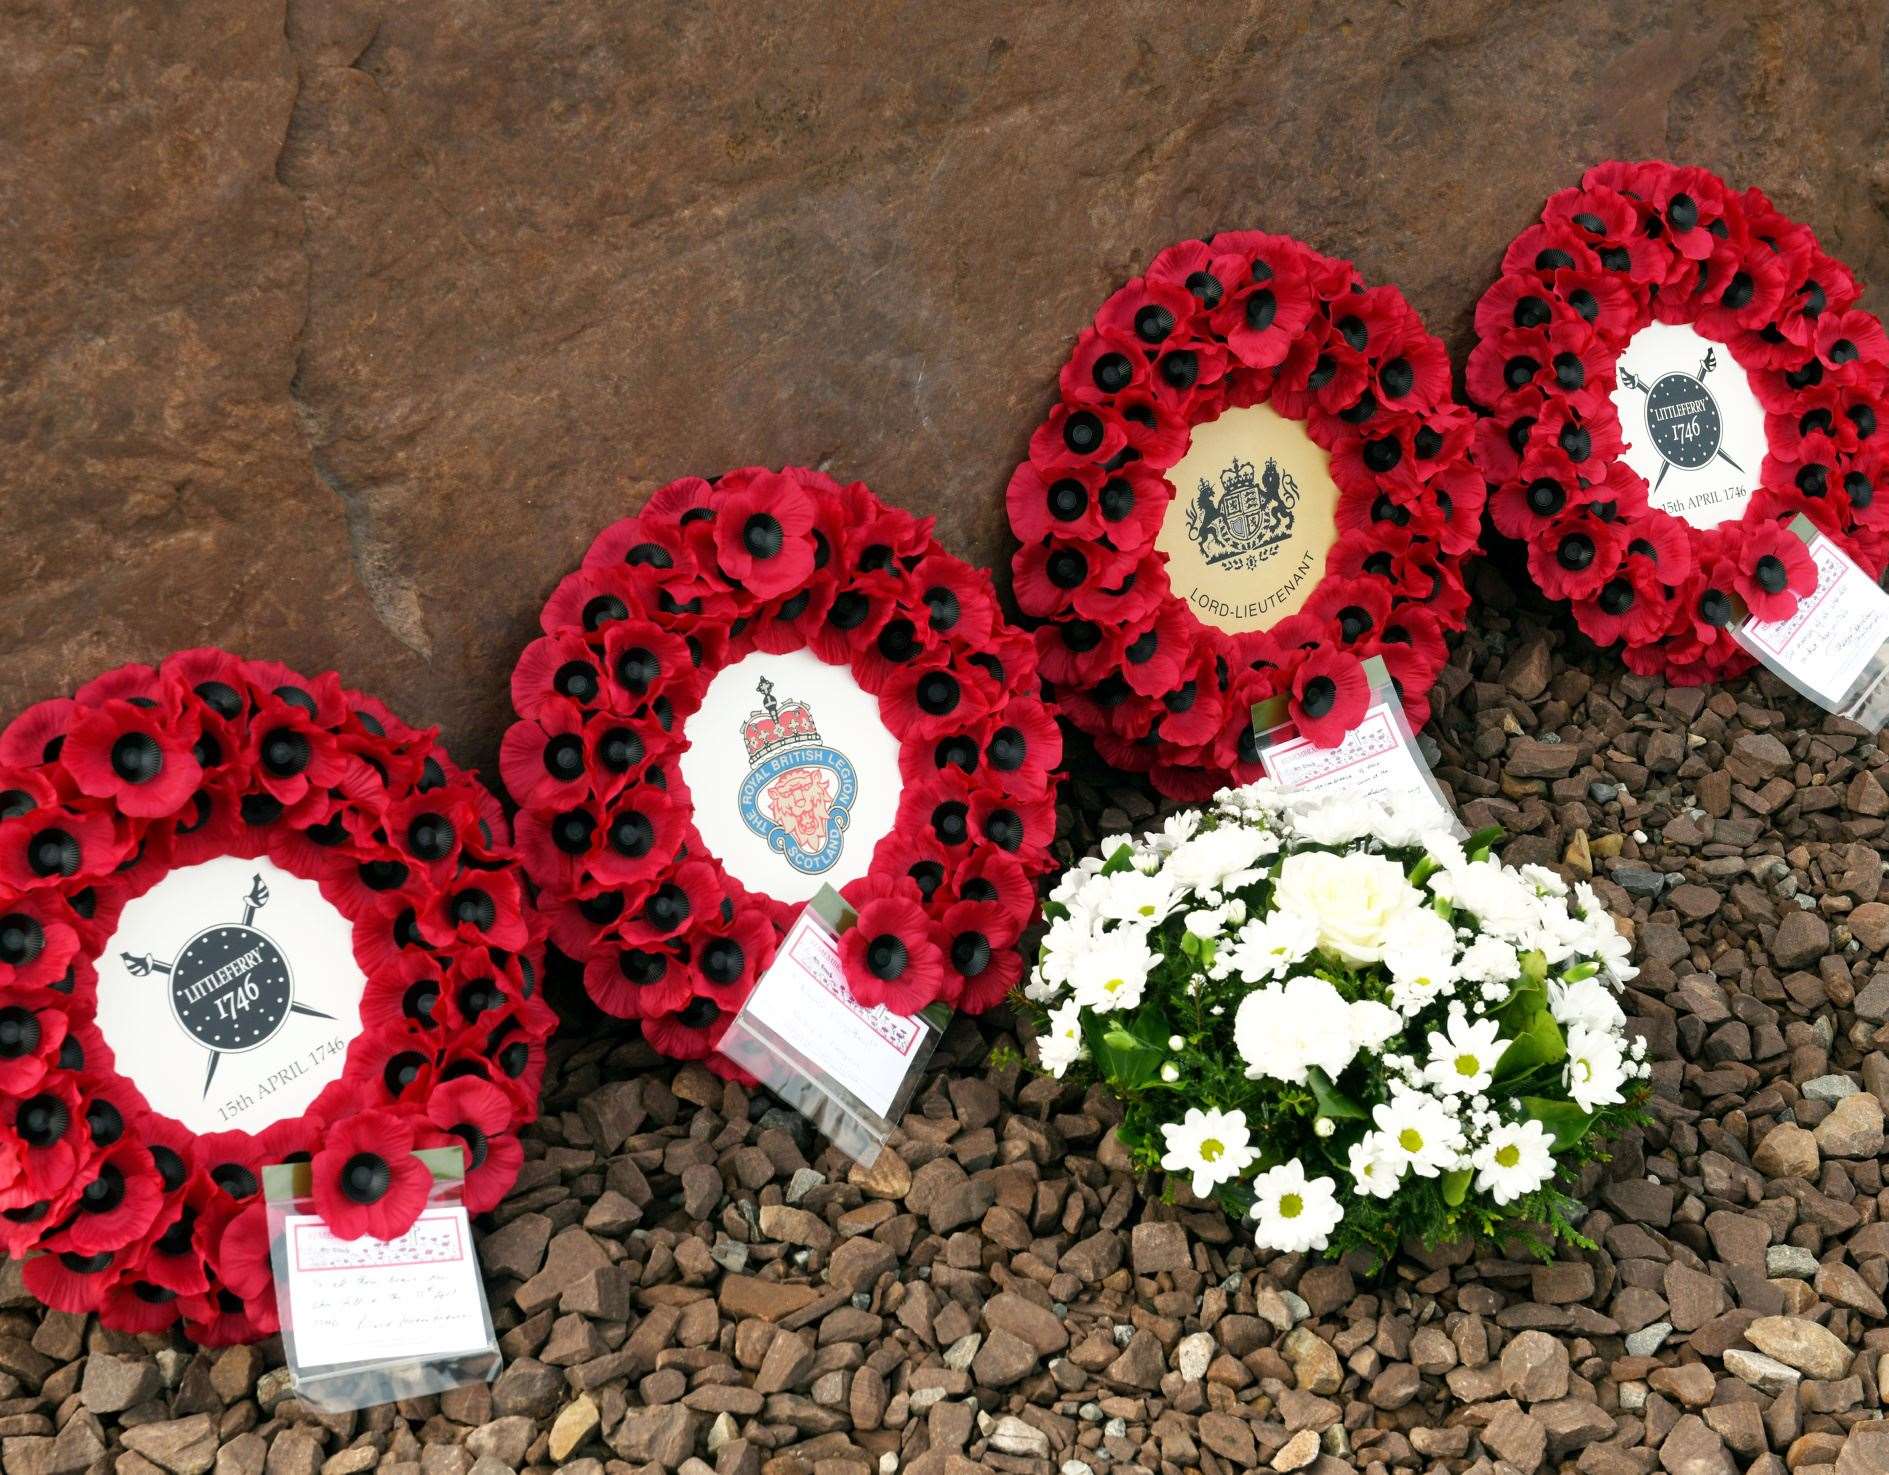 Four wreaths were laid at the memorial. Picture: James Mackenzie.